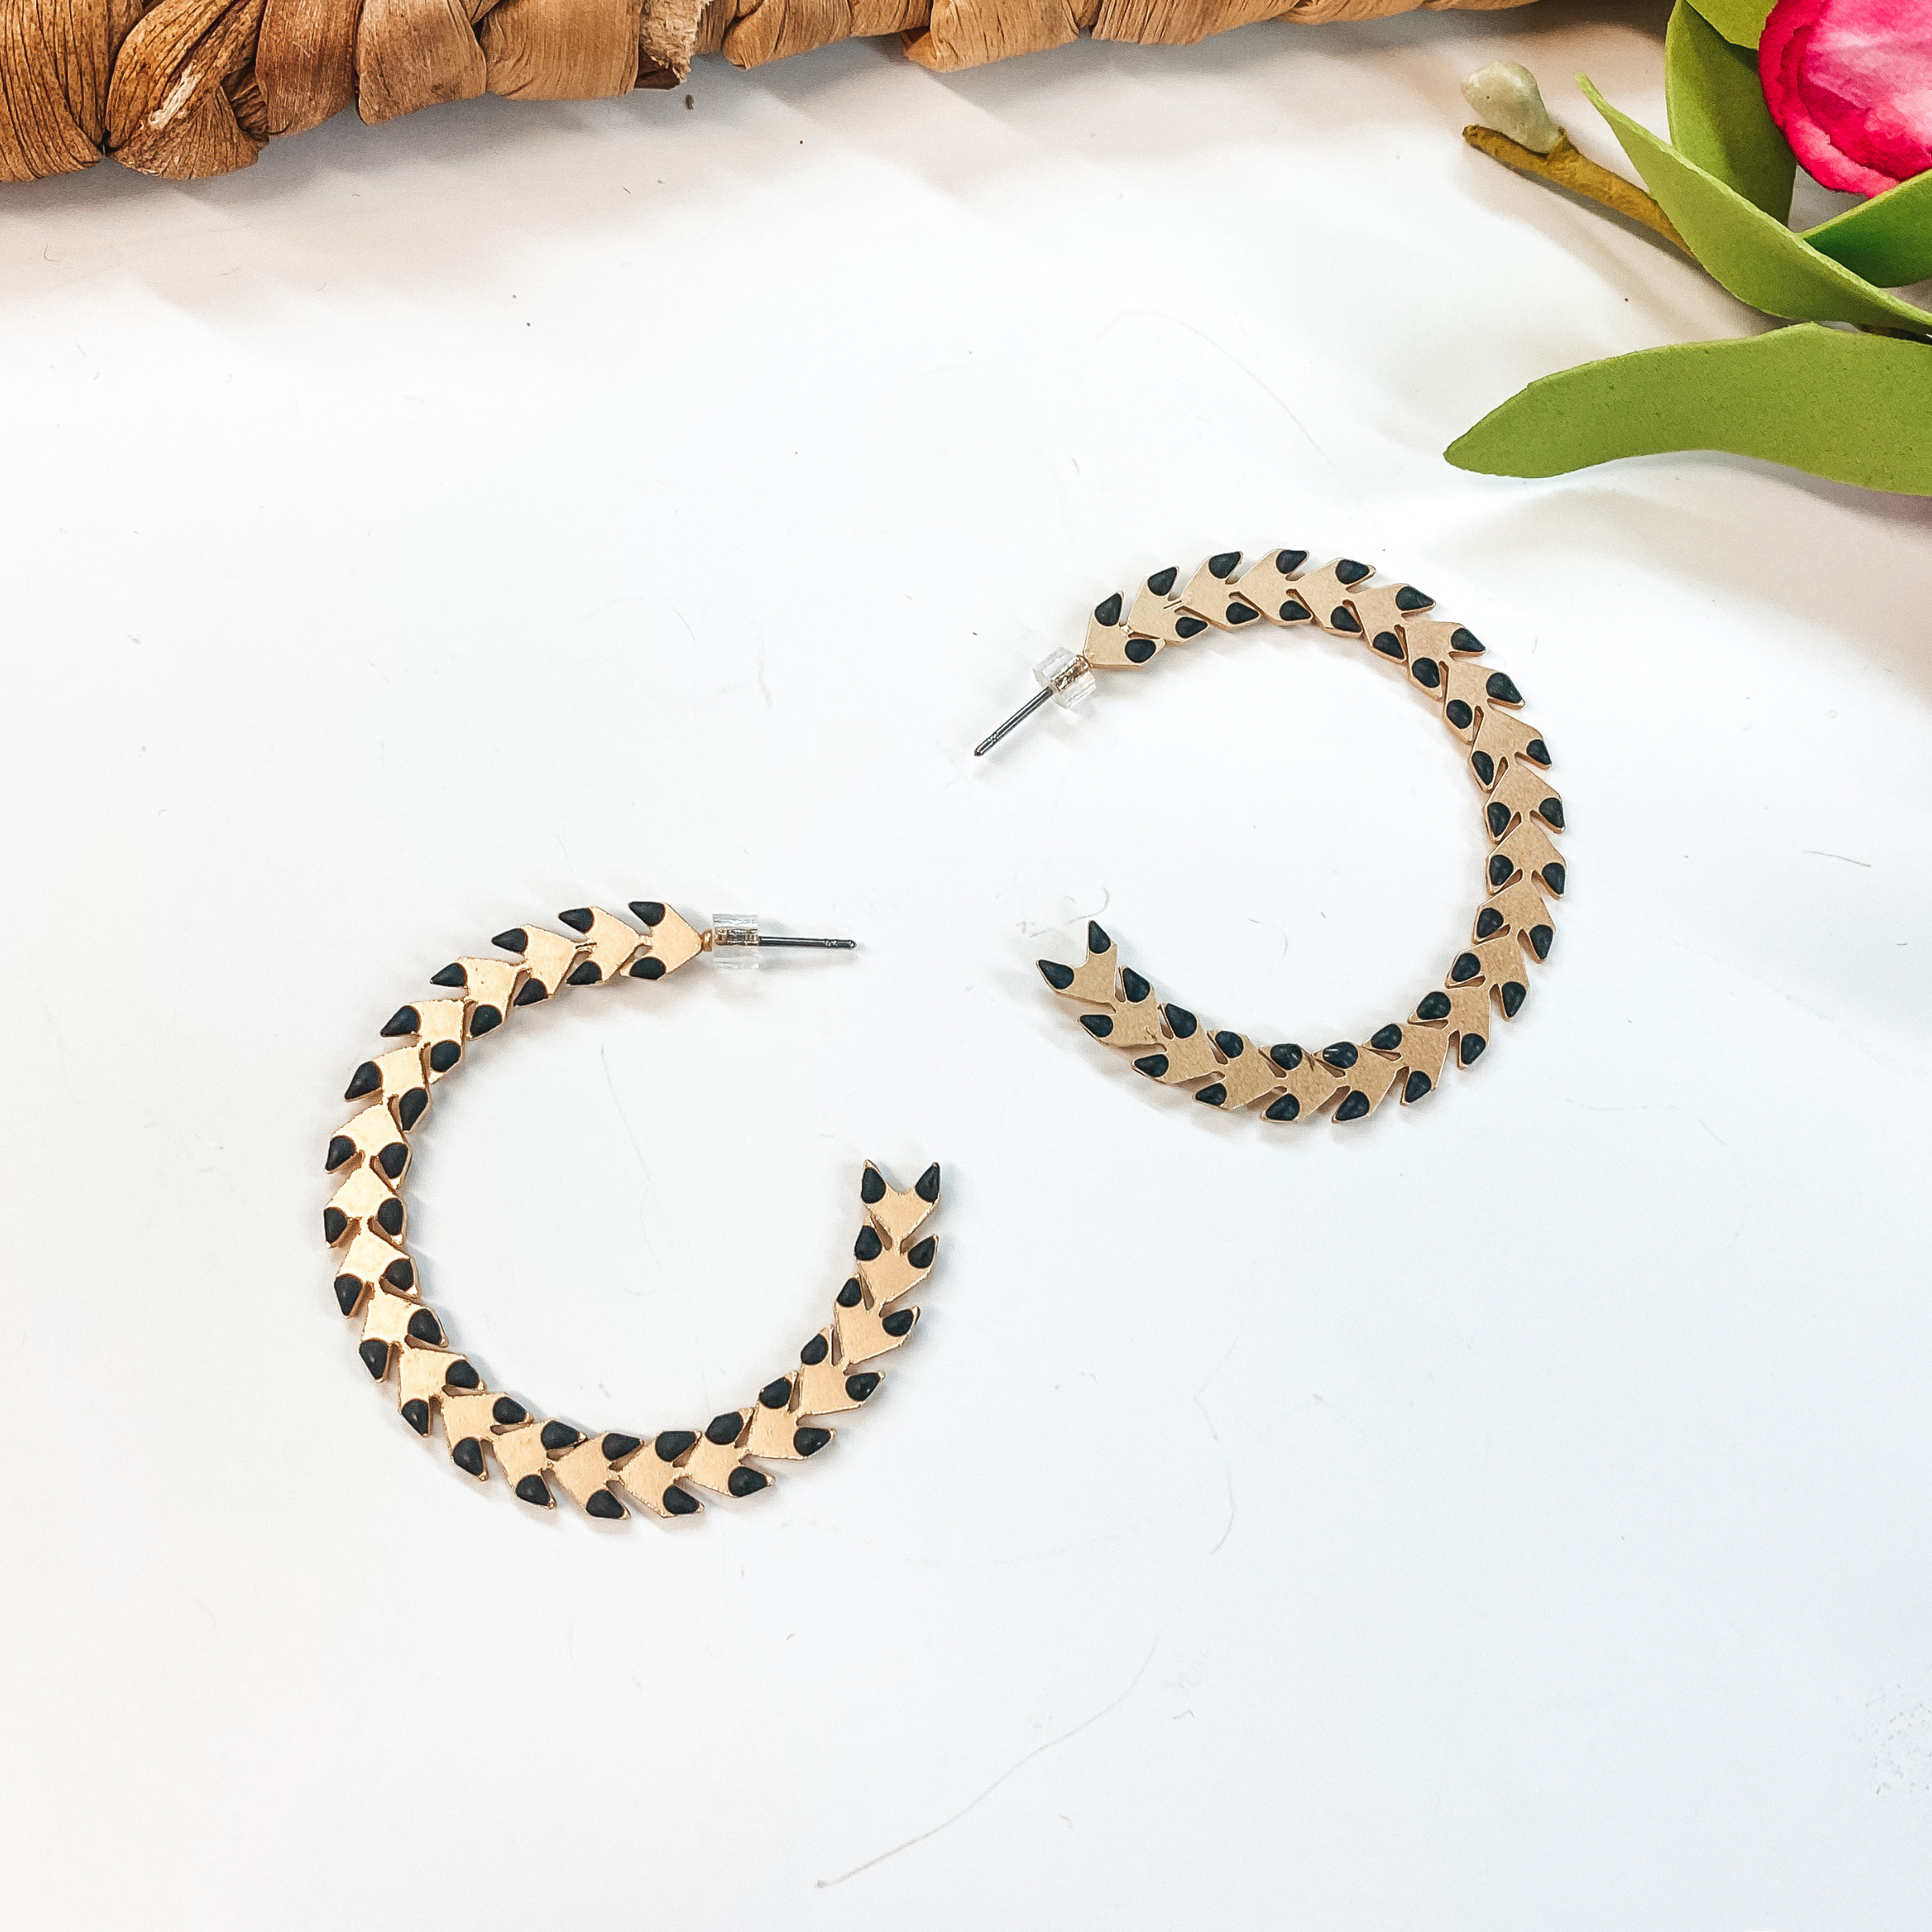 Spiked Hoop Earrings in Black and Gold - Giddy Up Glamour Boutique